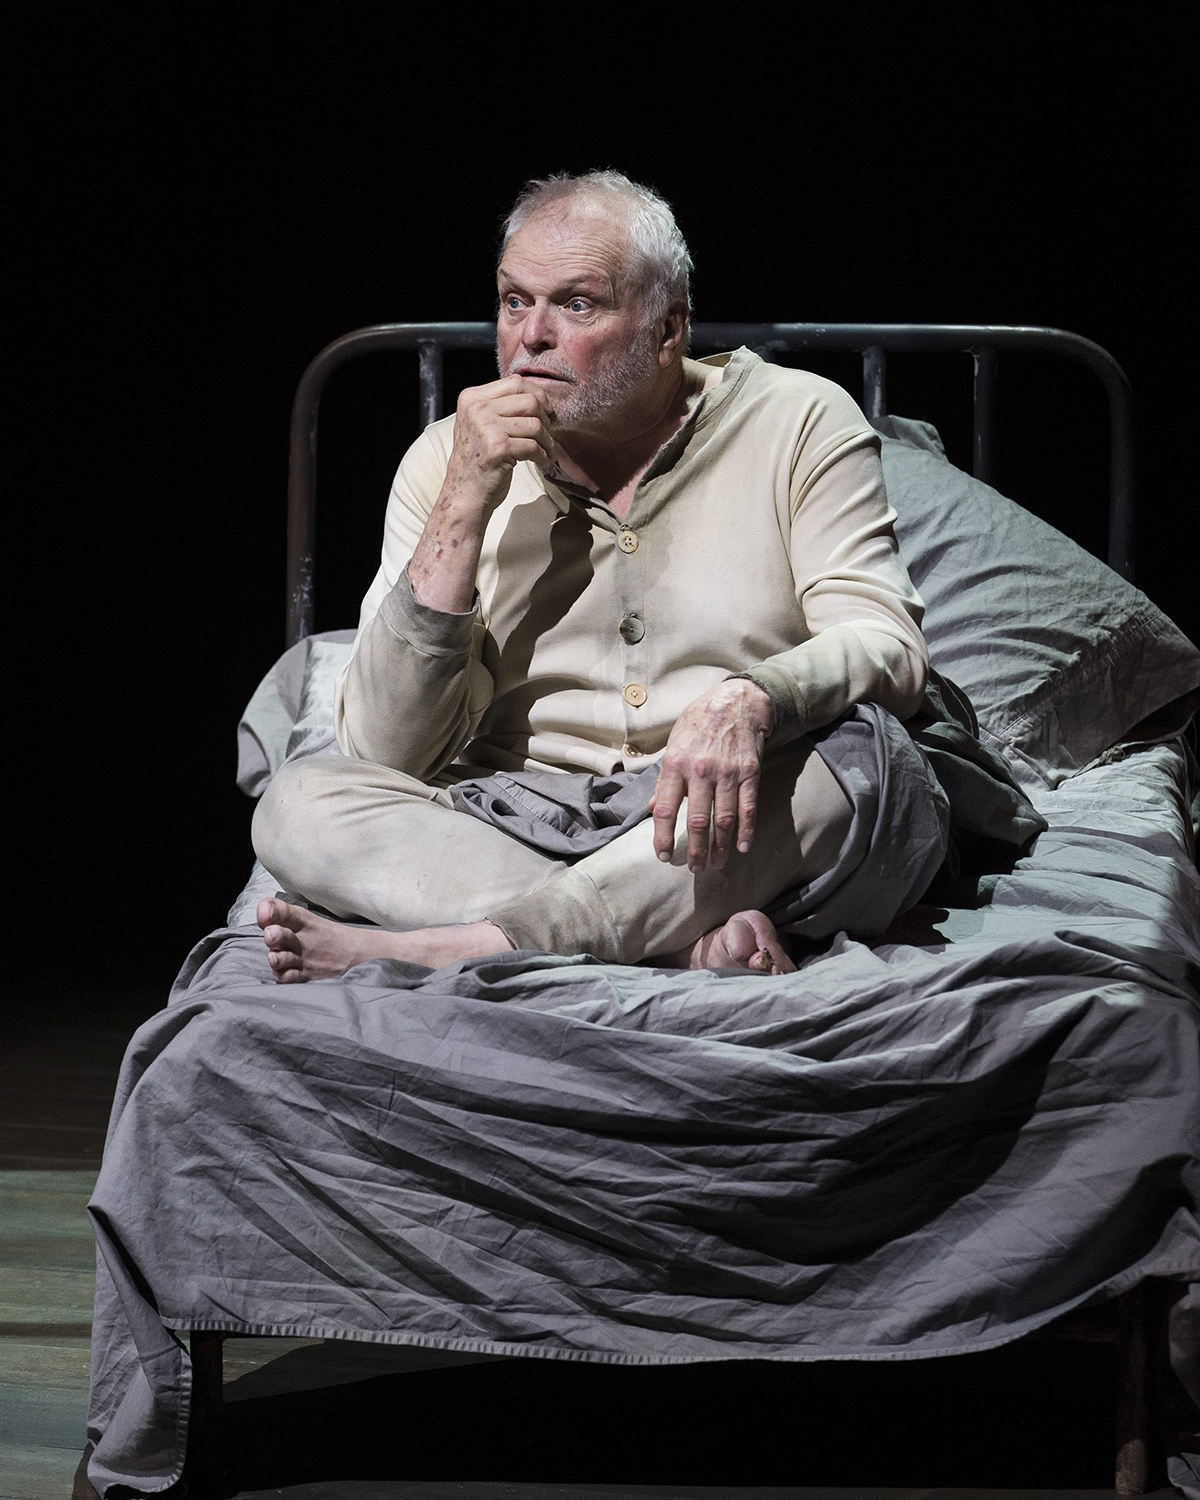 Actor Brian Dennehy portrays the character Thomas Dunne in the Mark Taper Forum’s production of Sebastian Barry’s play “The Steward of Christendom.” Photo by Craig Schwartz.